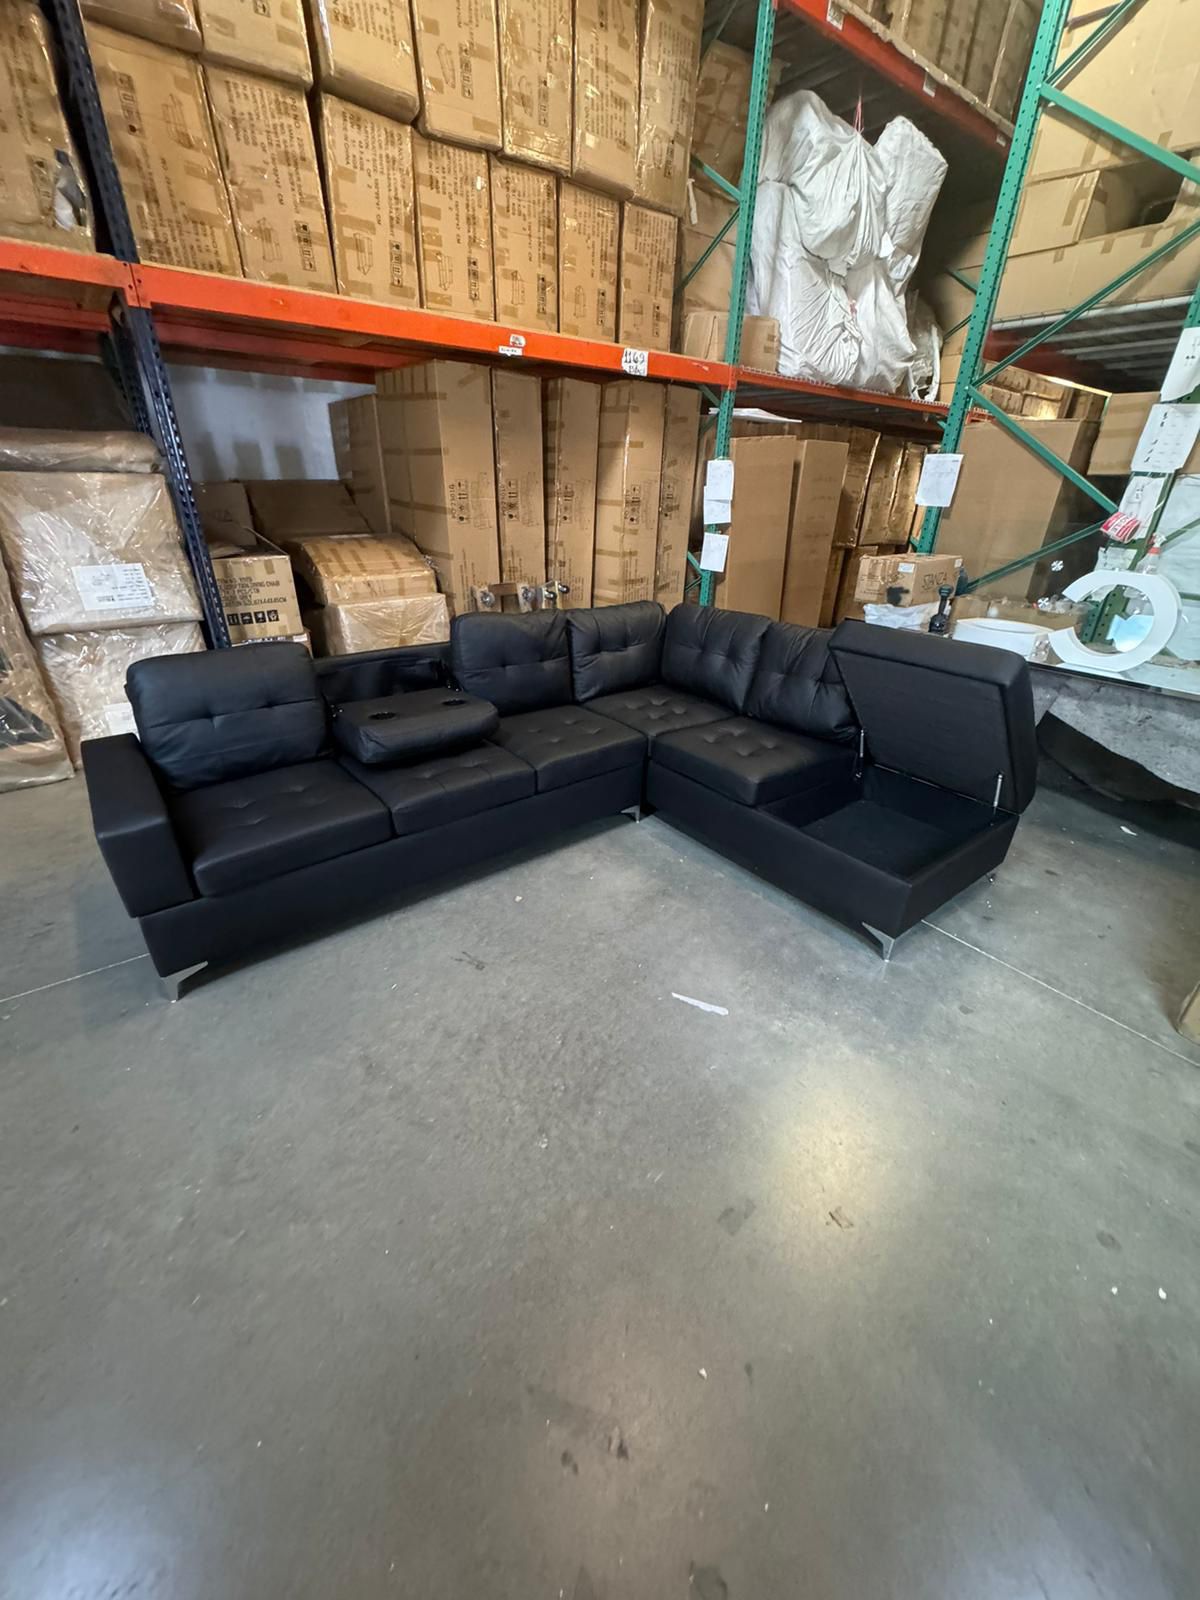 Brand new sectional in box- shop now pay later. $49 Down 